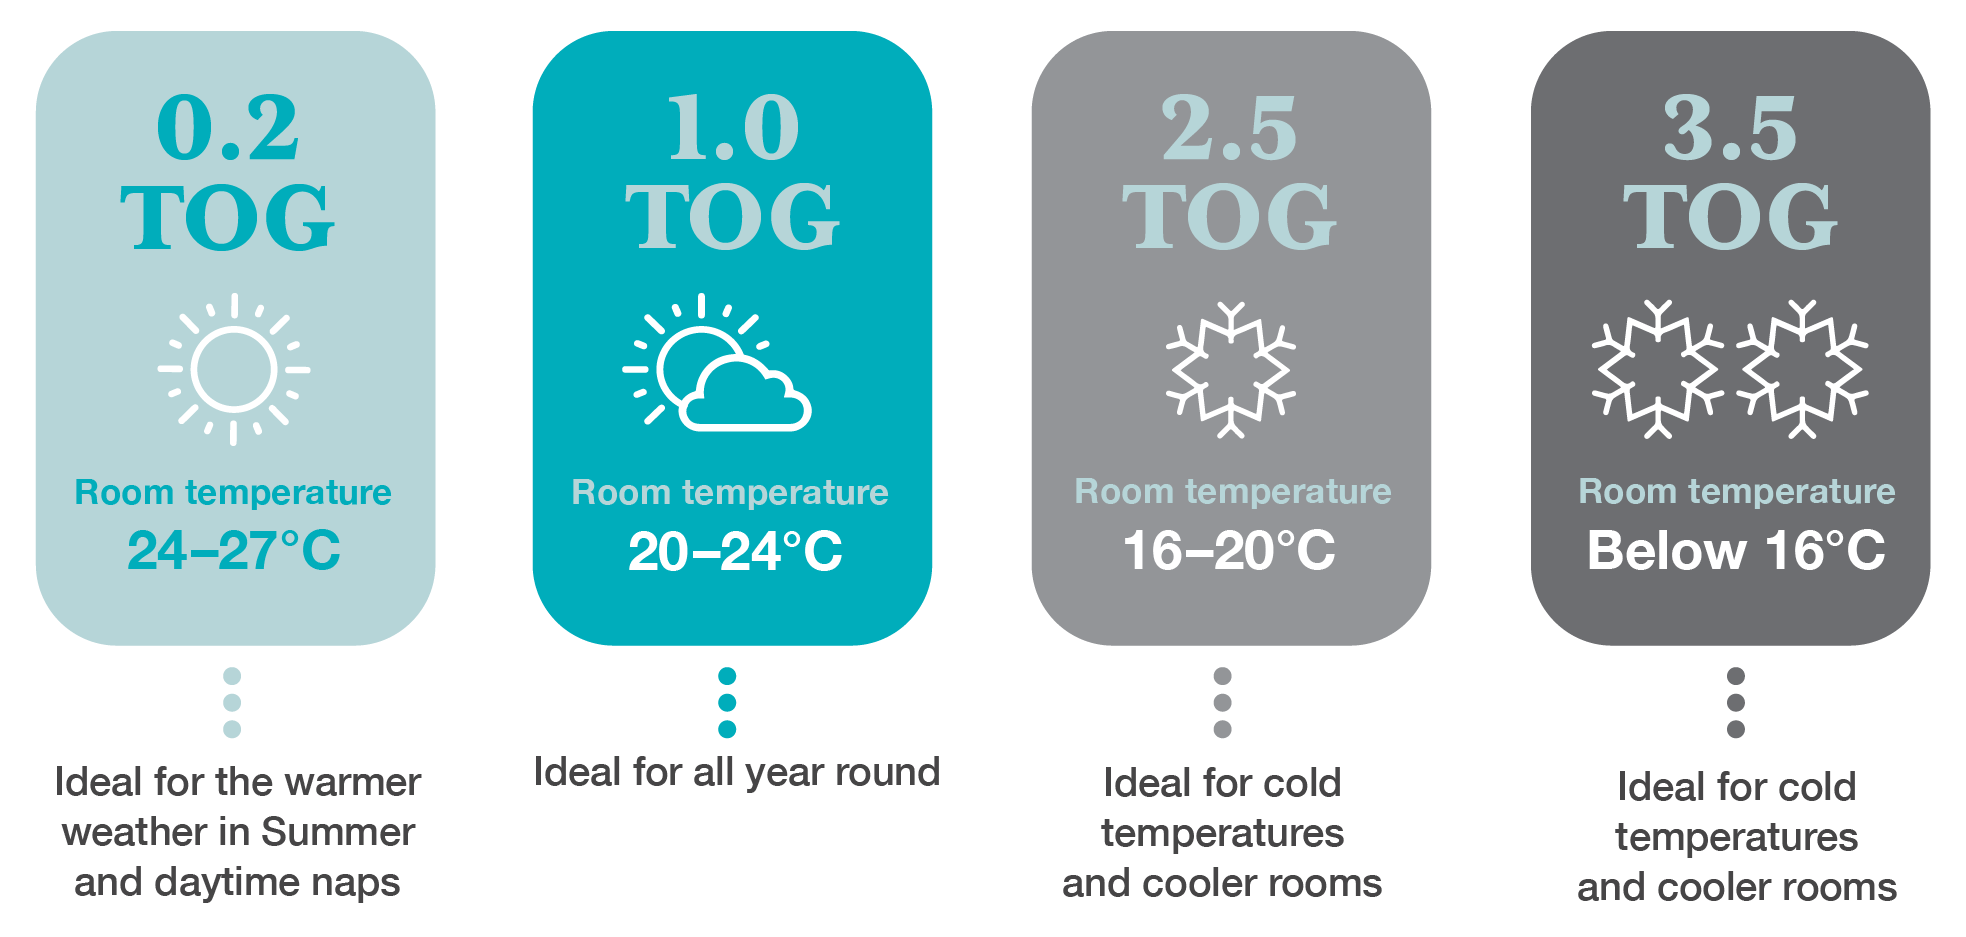 What is a TOG rating? TOG stands for Thermal Overall Grade and is a unit of measurement for insulation and warmth of sleepwear and bedding. 